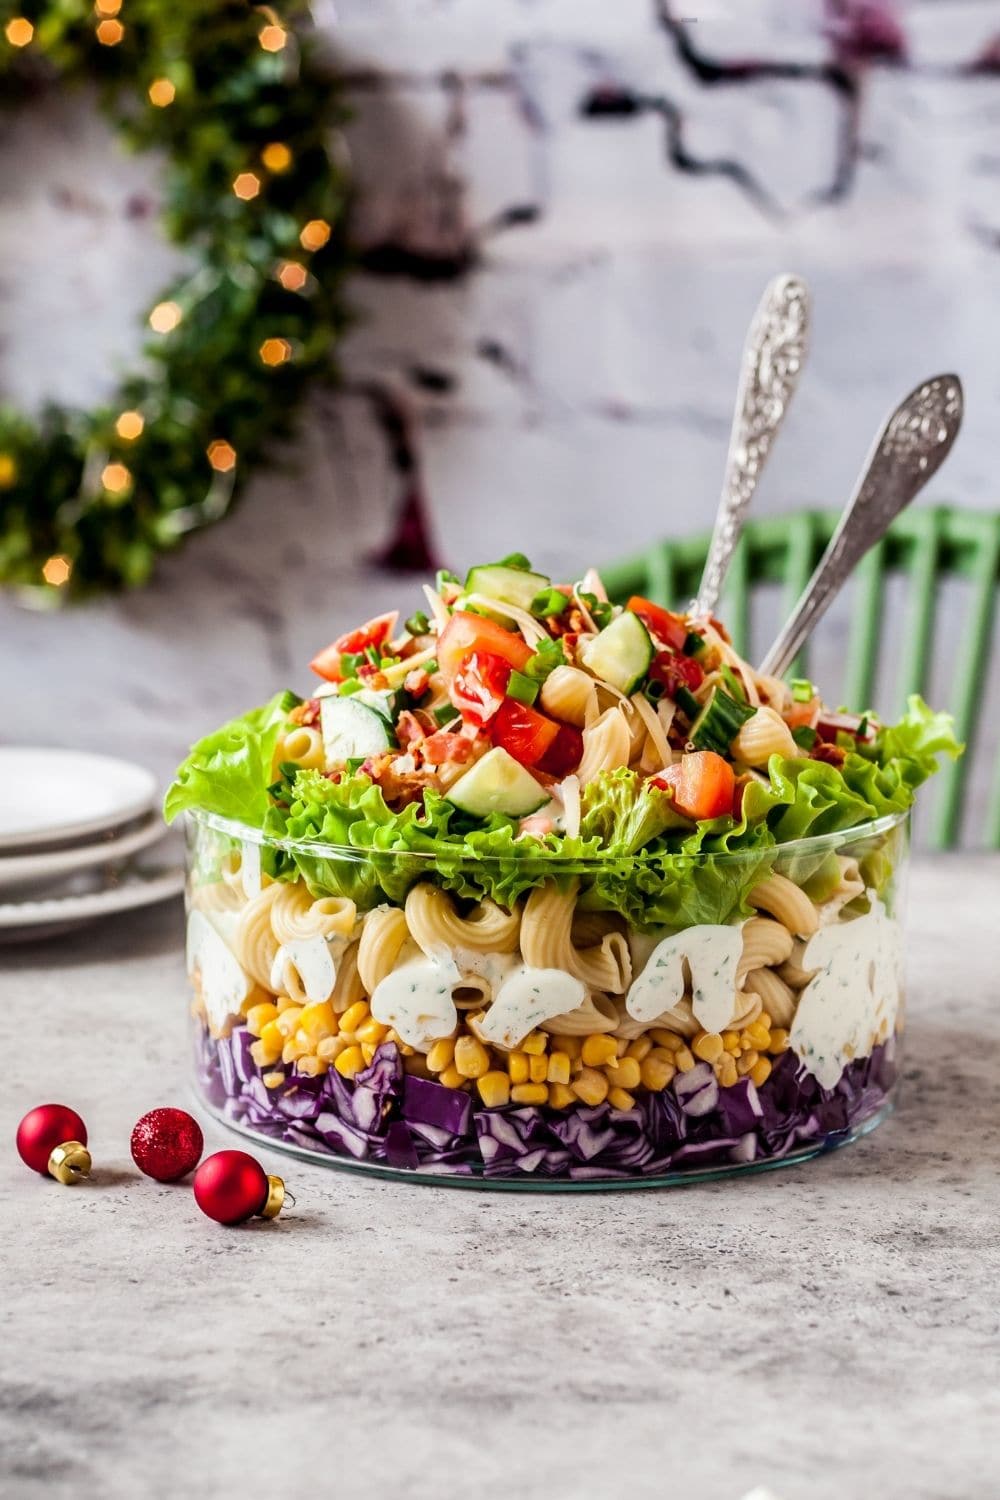 Layered Pasta Salad with Red Cabbage, Corn, Tomatoes, Cucumber and Herbs